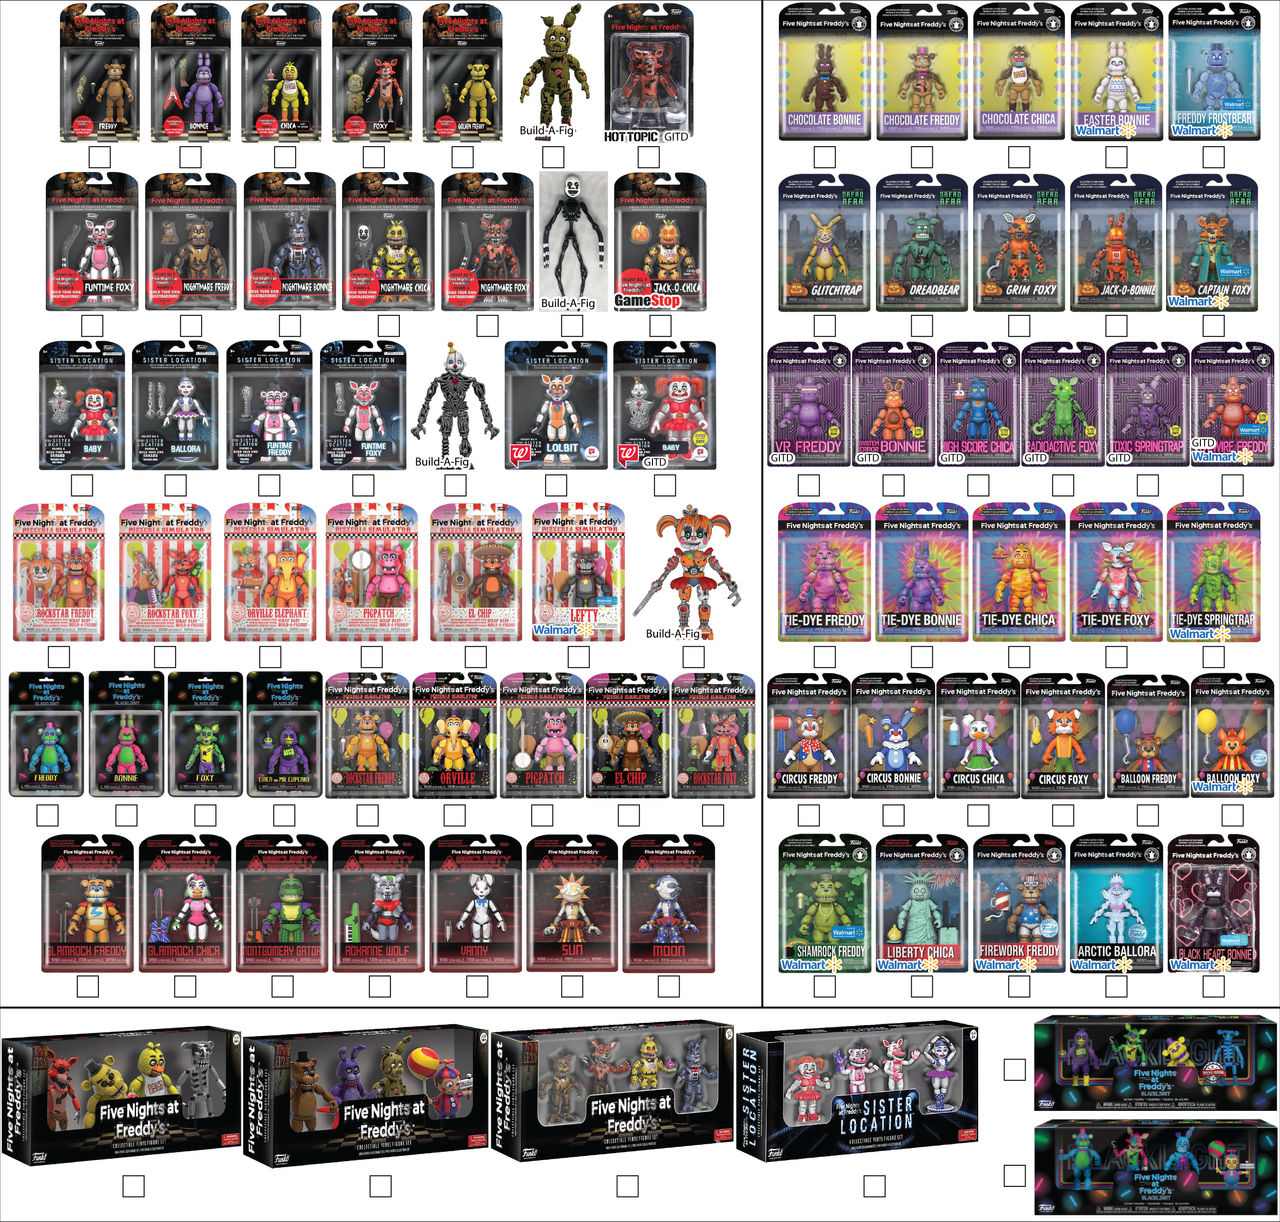 Five Nights At Freddy's Action Figure Checklist by cringeguava on DeviantArt